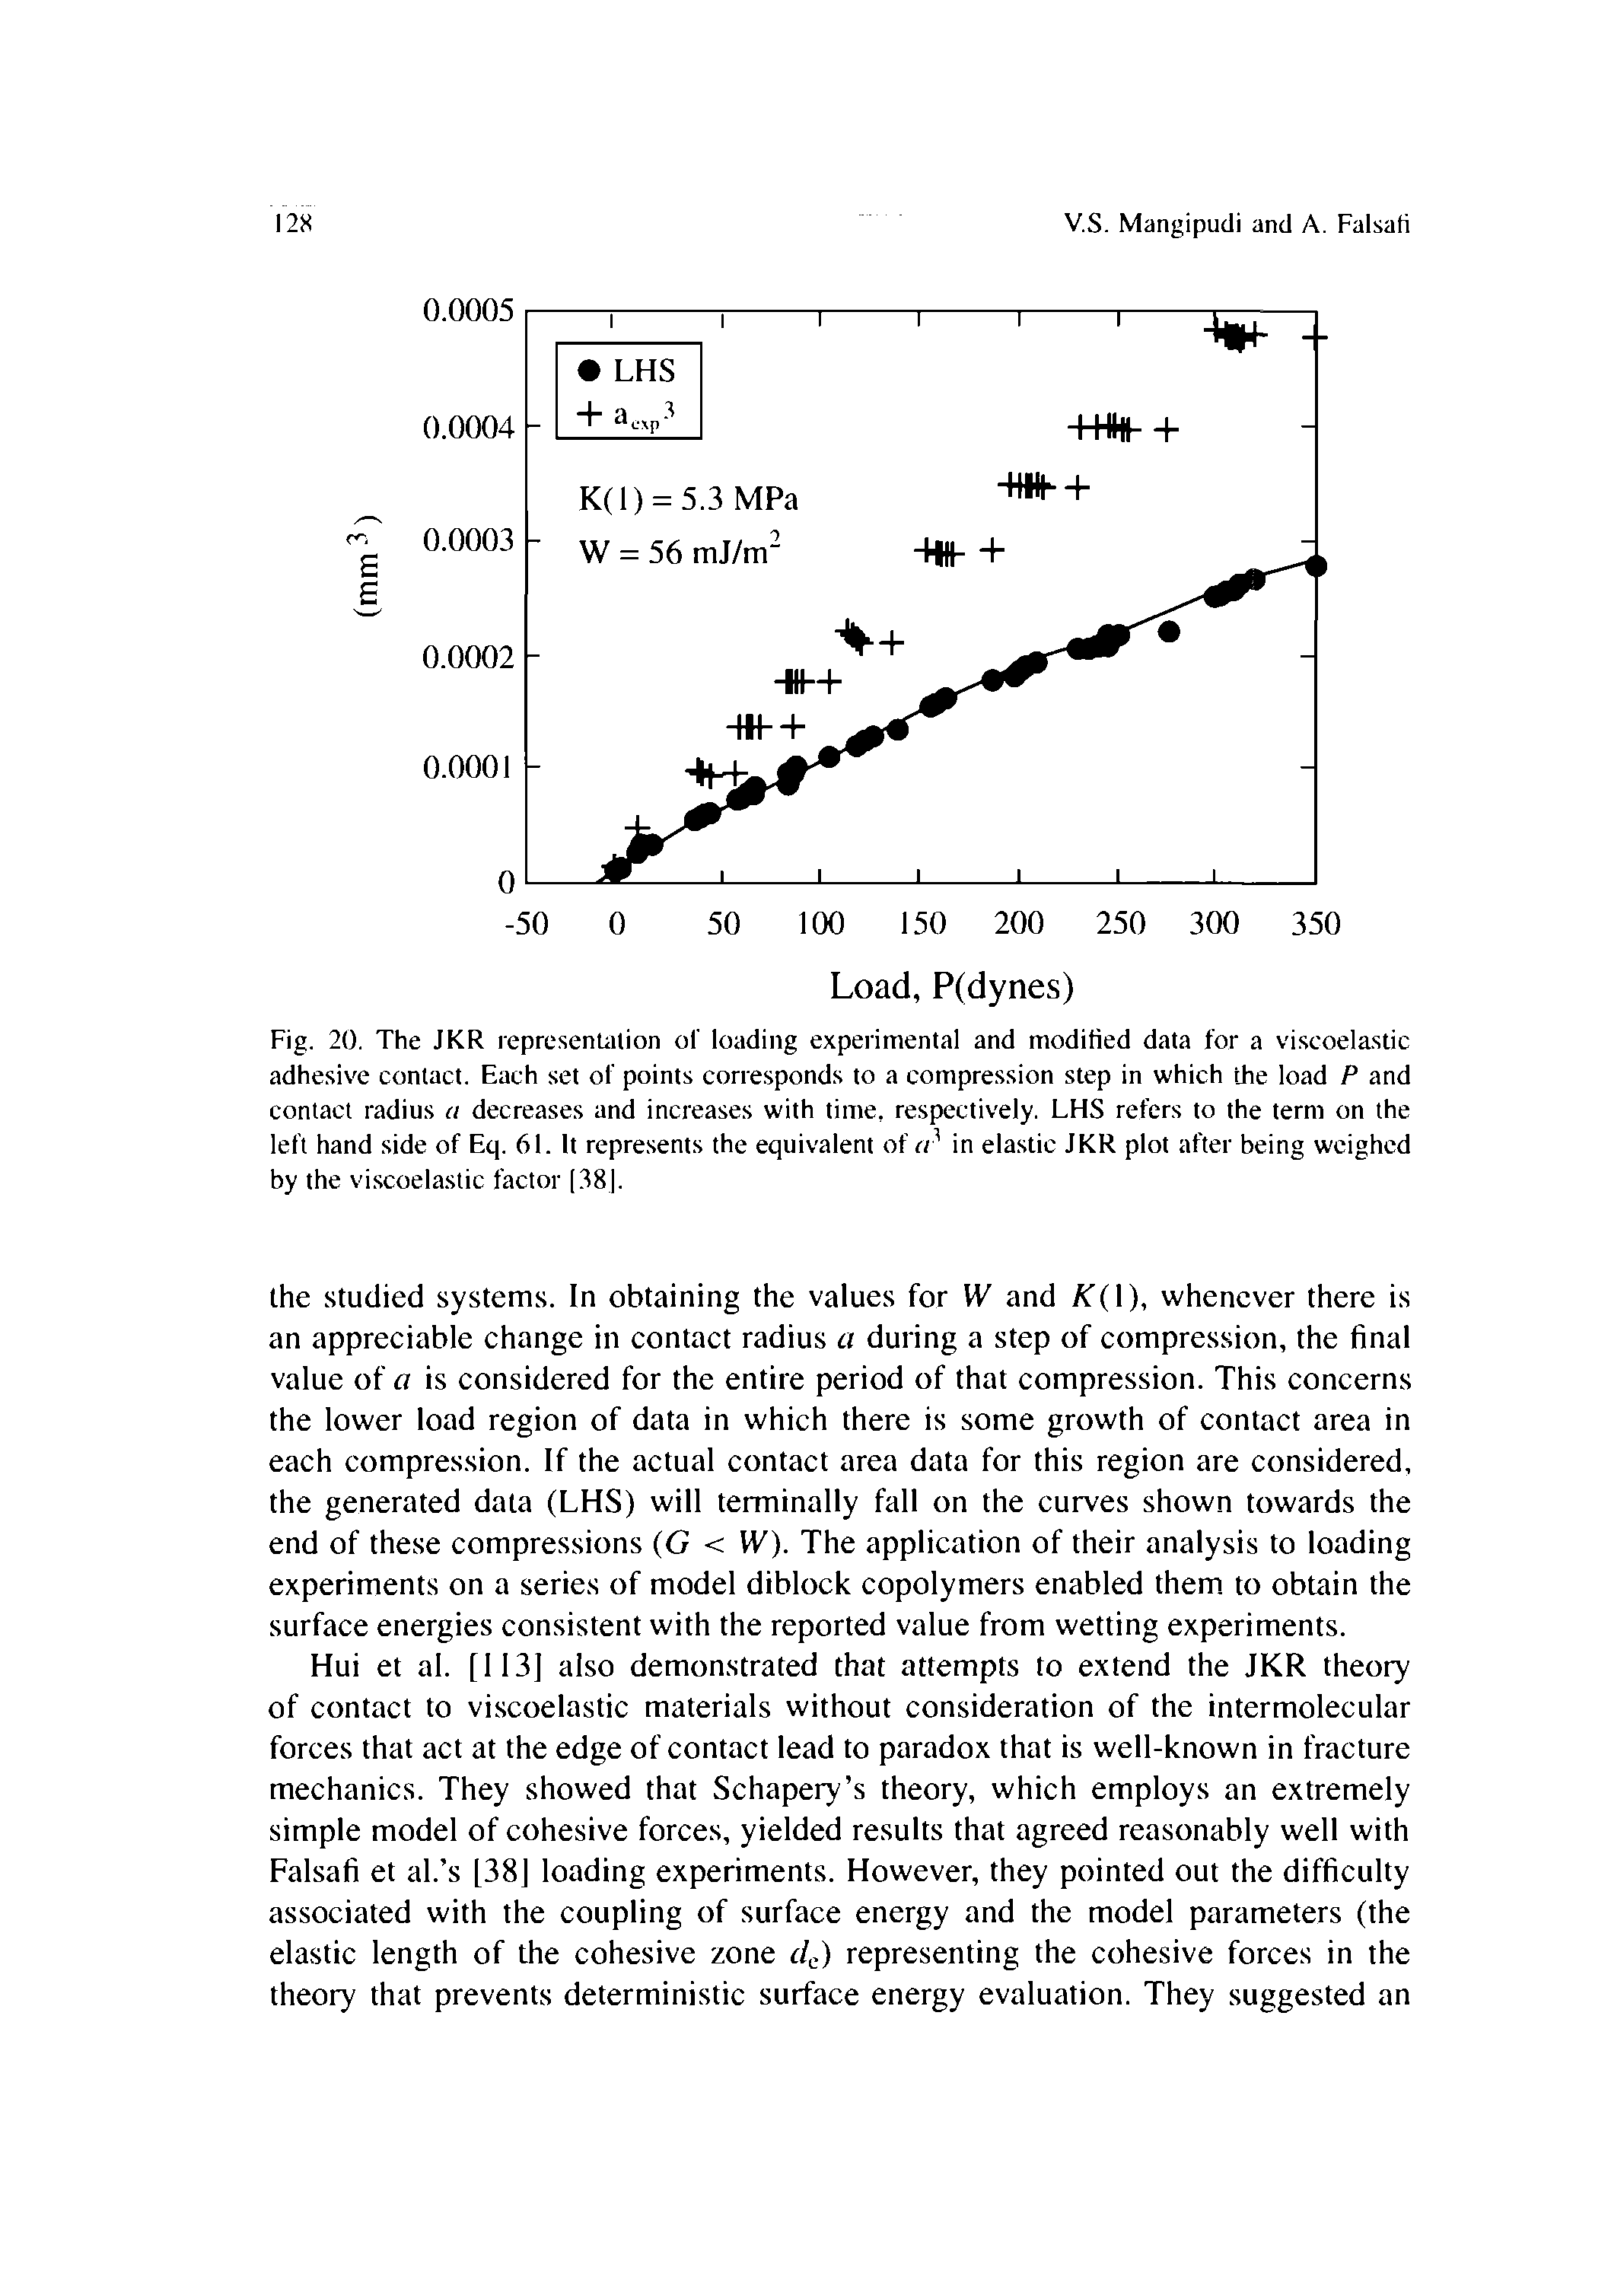 Fig. 20. The JKR represenUilion of loading experimental and modified data for a viscoelastic adhesive contact. Each set of points corresponds to a compression step in which the load P and contact radius a decreases and increases with time, respectively. LHS refers to the term on the left hand side of Eq. 61. It represents the equivalent of r/ in elastic JKR plot after being weighed by the viscoelastic factor (38. ...